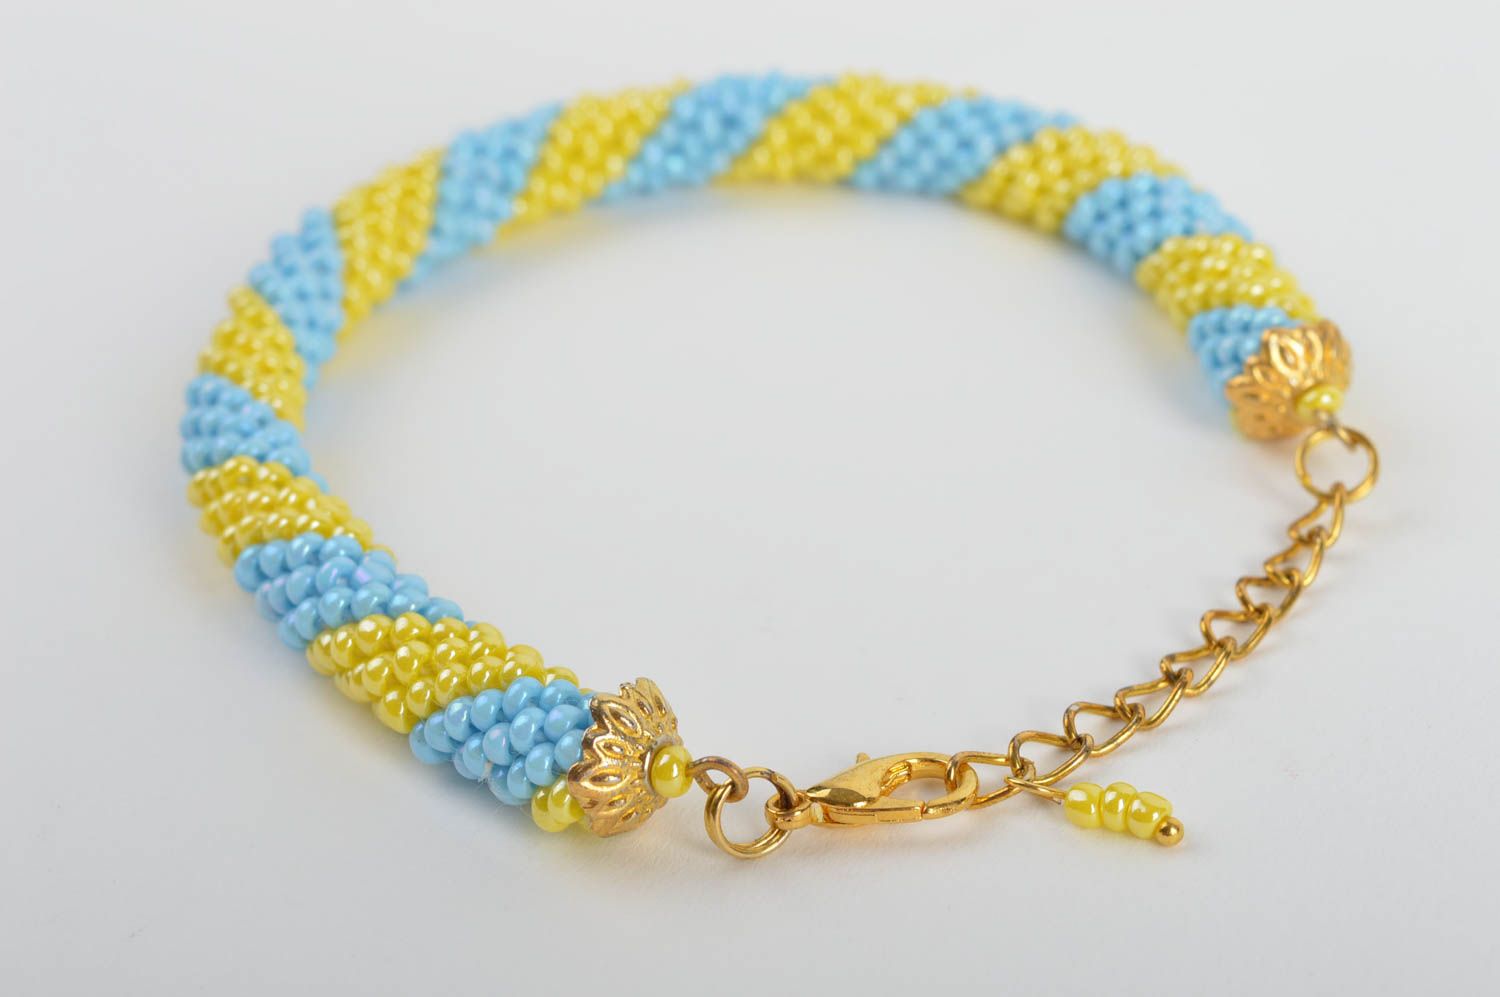 Handmade beaded cord wrist bracelet in blue and yellow colors for women photo 3